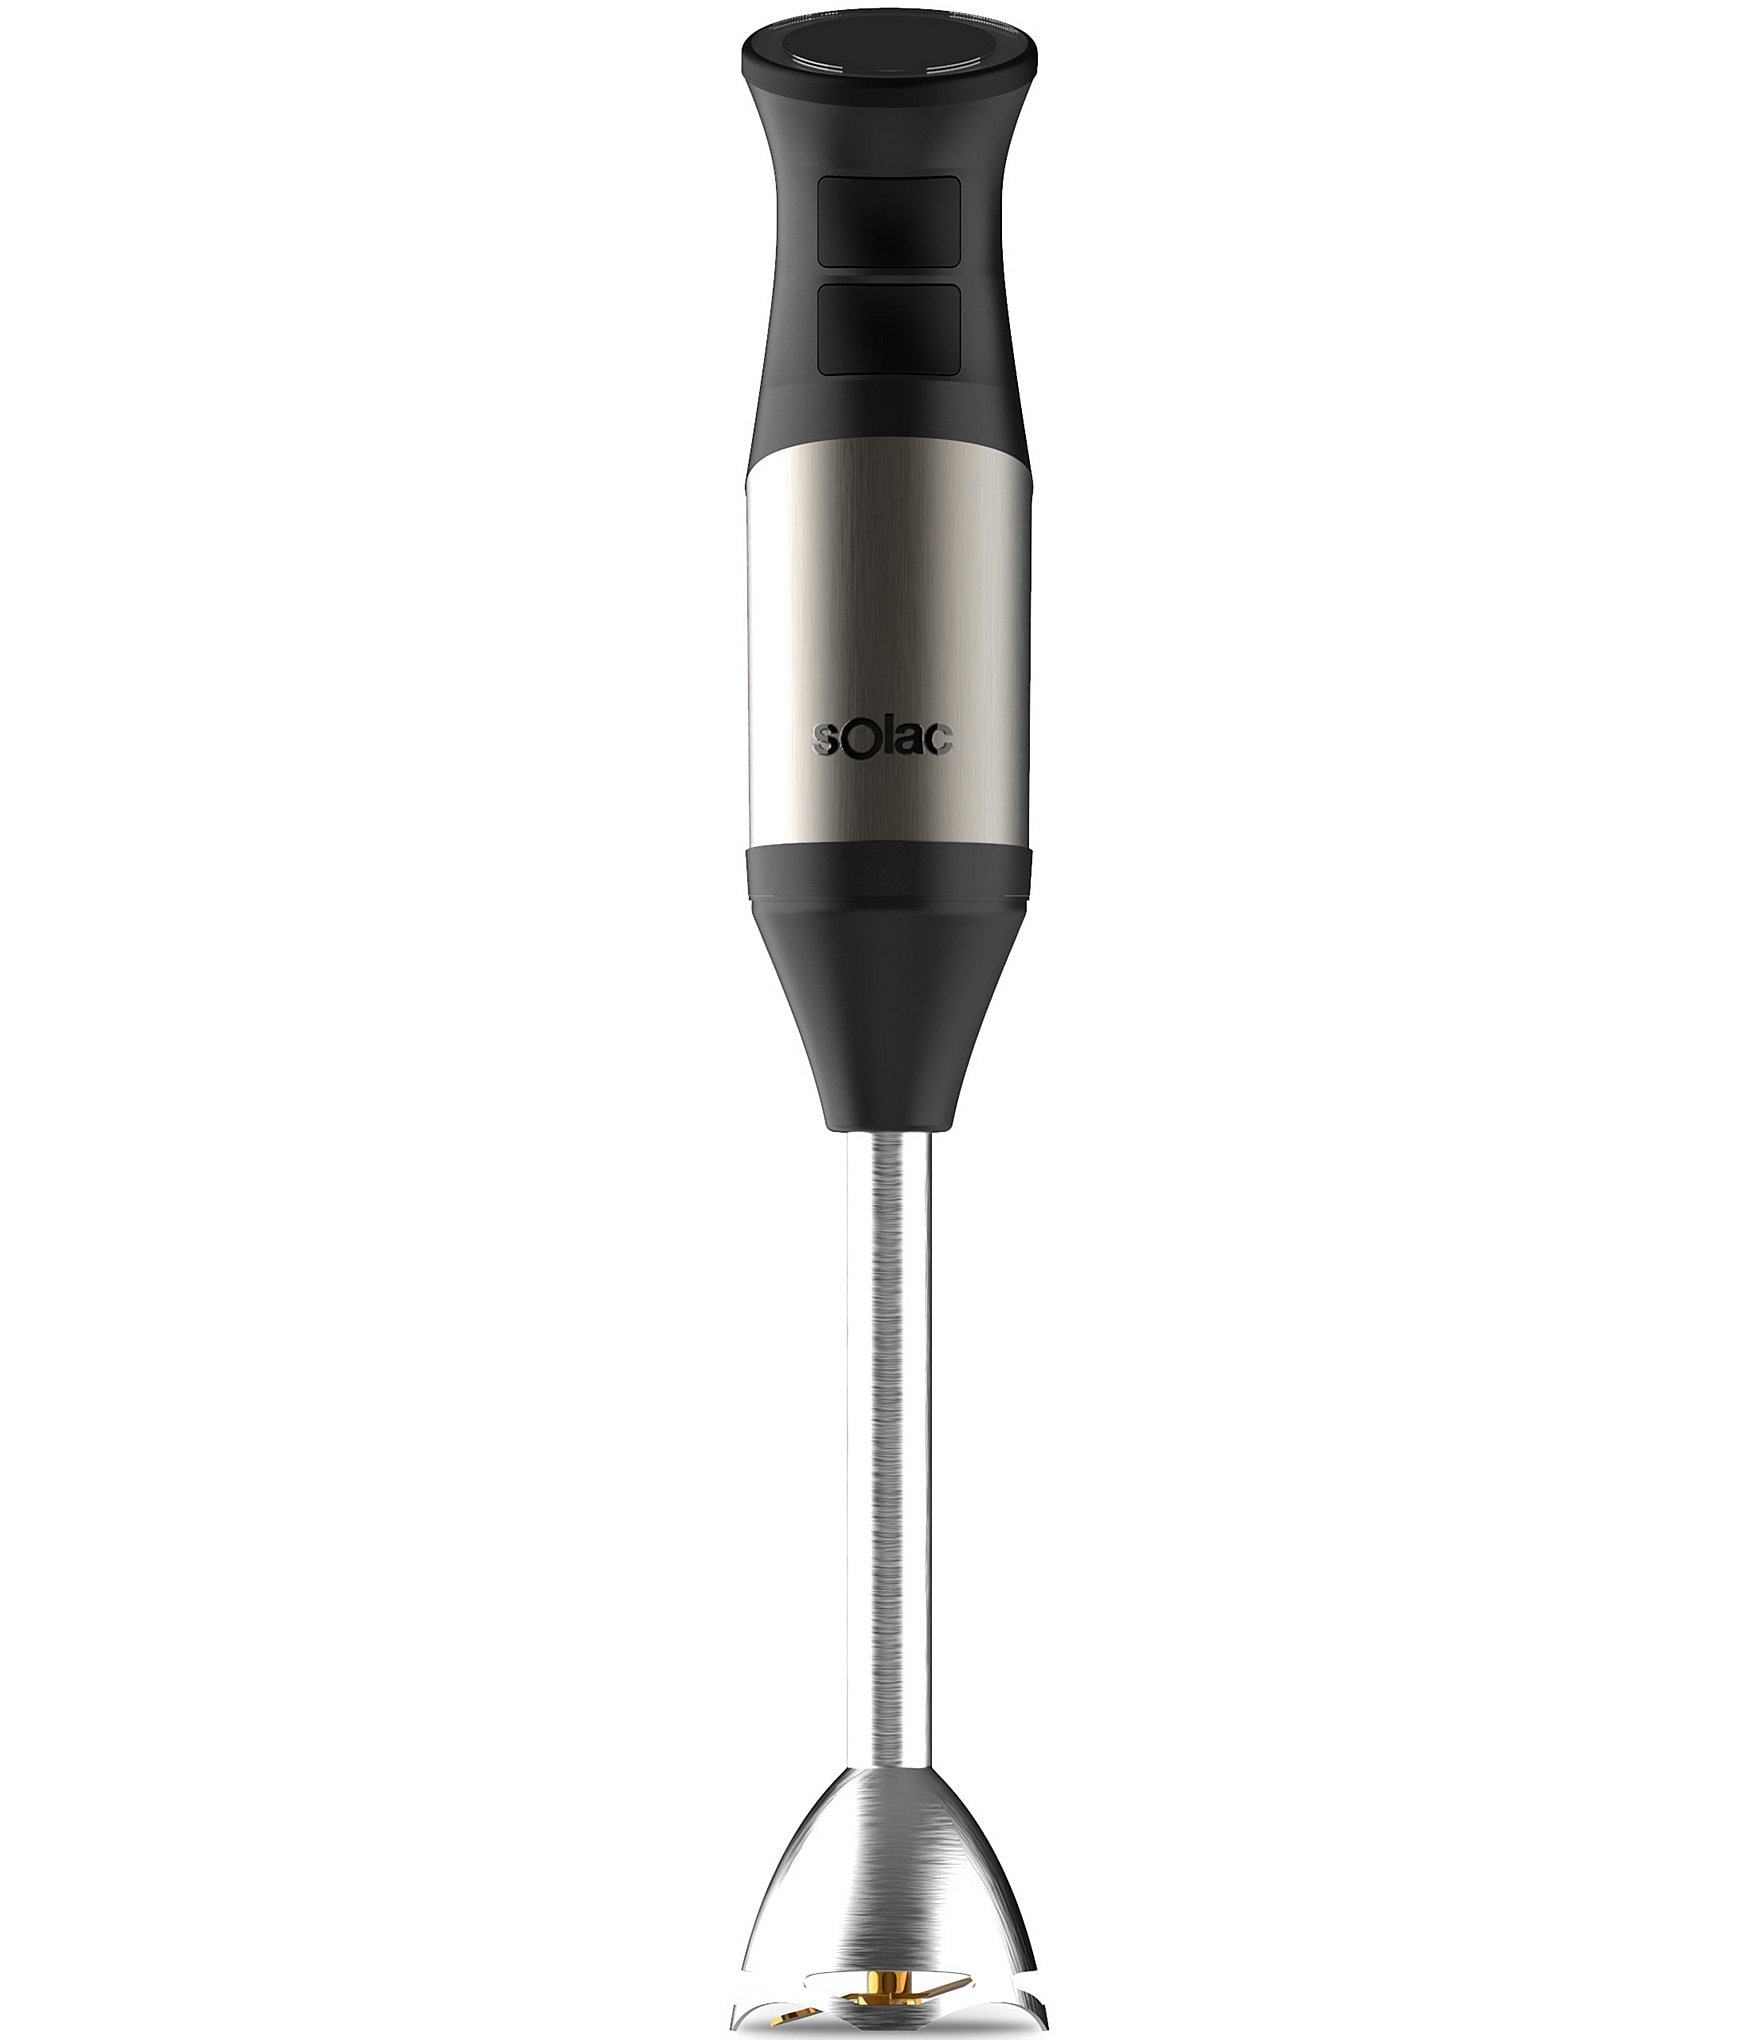 https://dimg.dillards.com/is/image/DillardsZoom/zoom/solac-professional-1000w-immersion-hand-blender-with-accessory-kit/00000000_zi_20341574.jpg